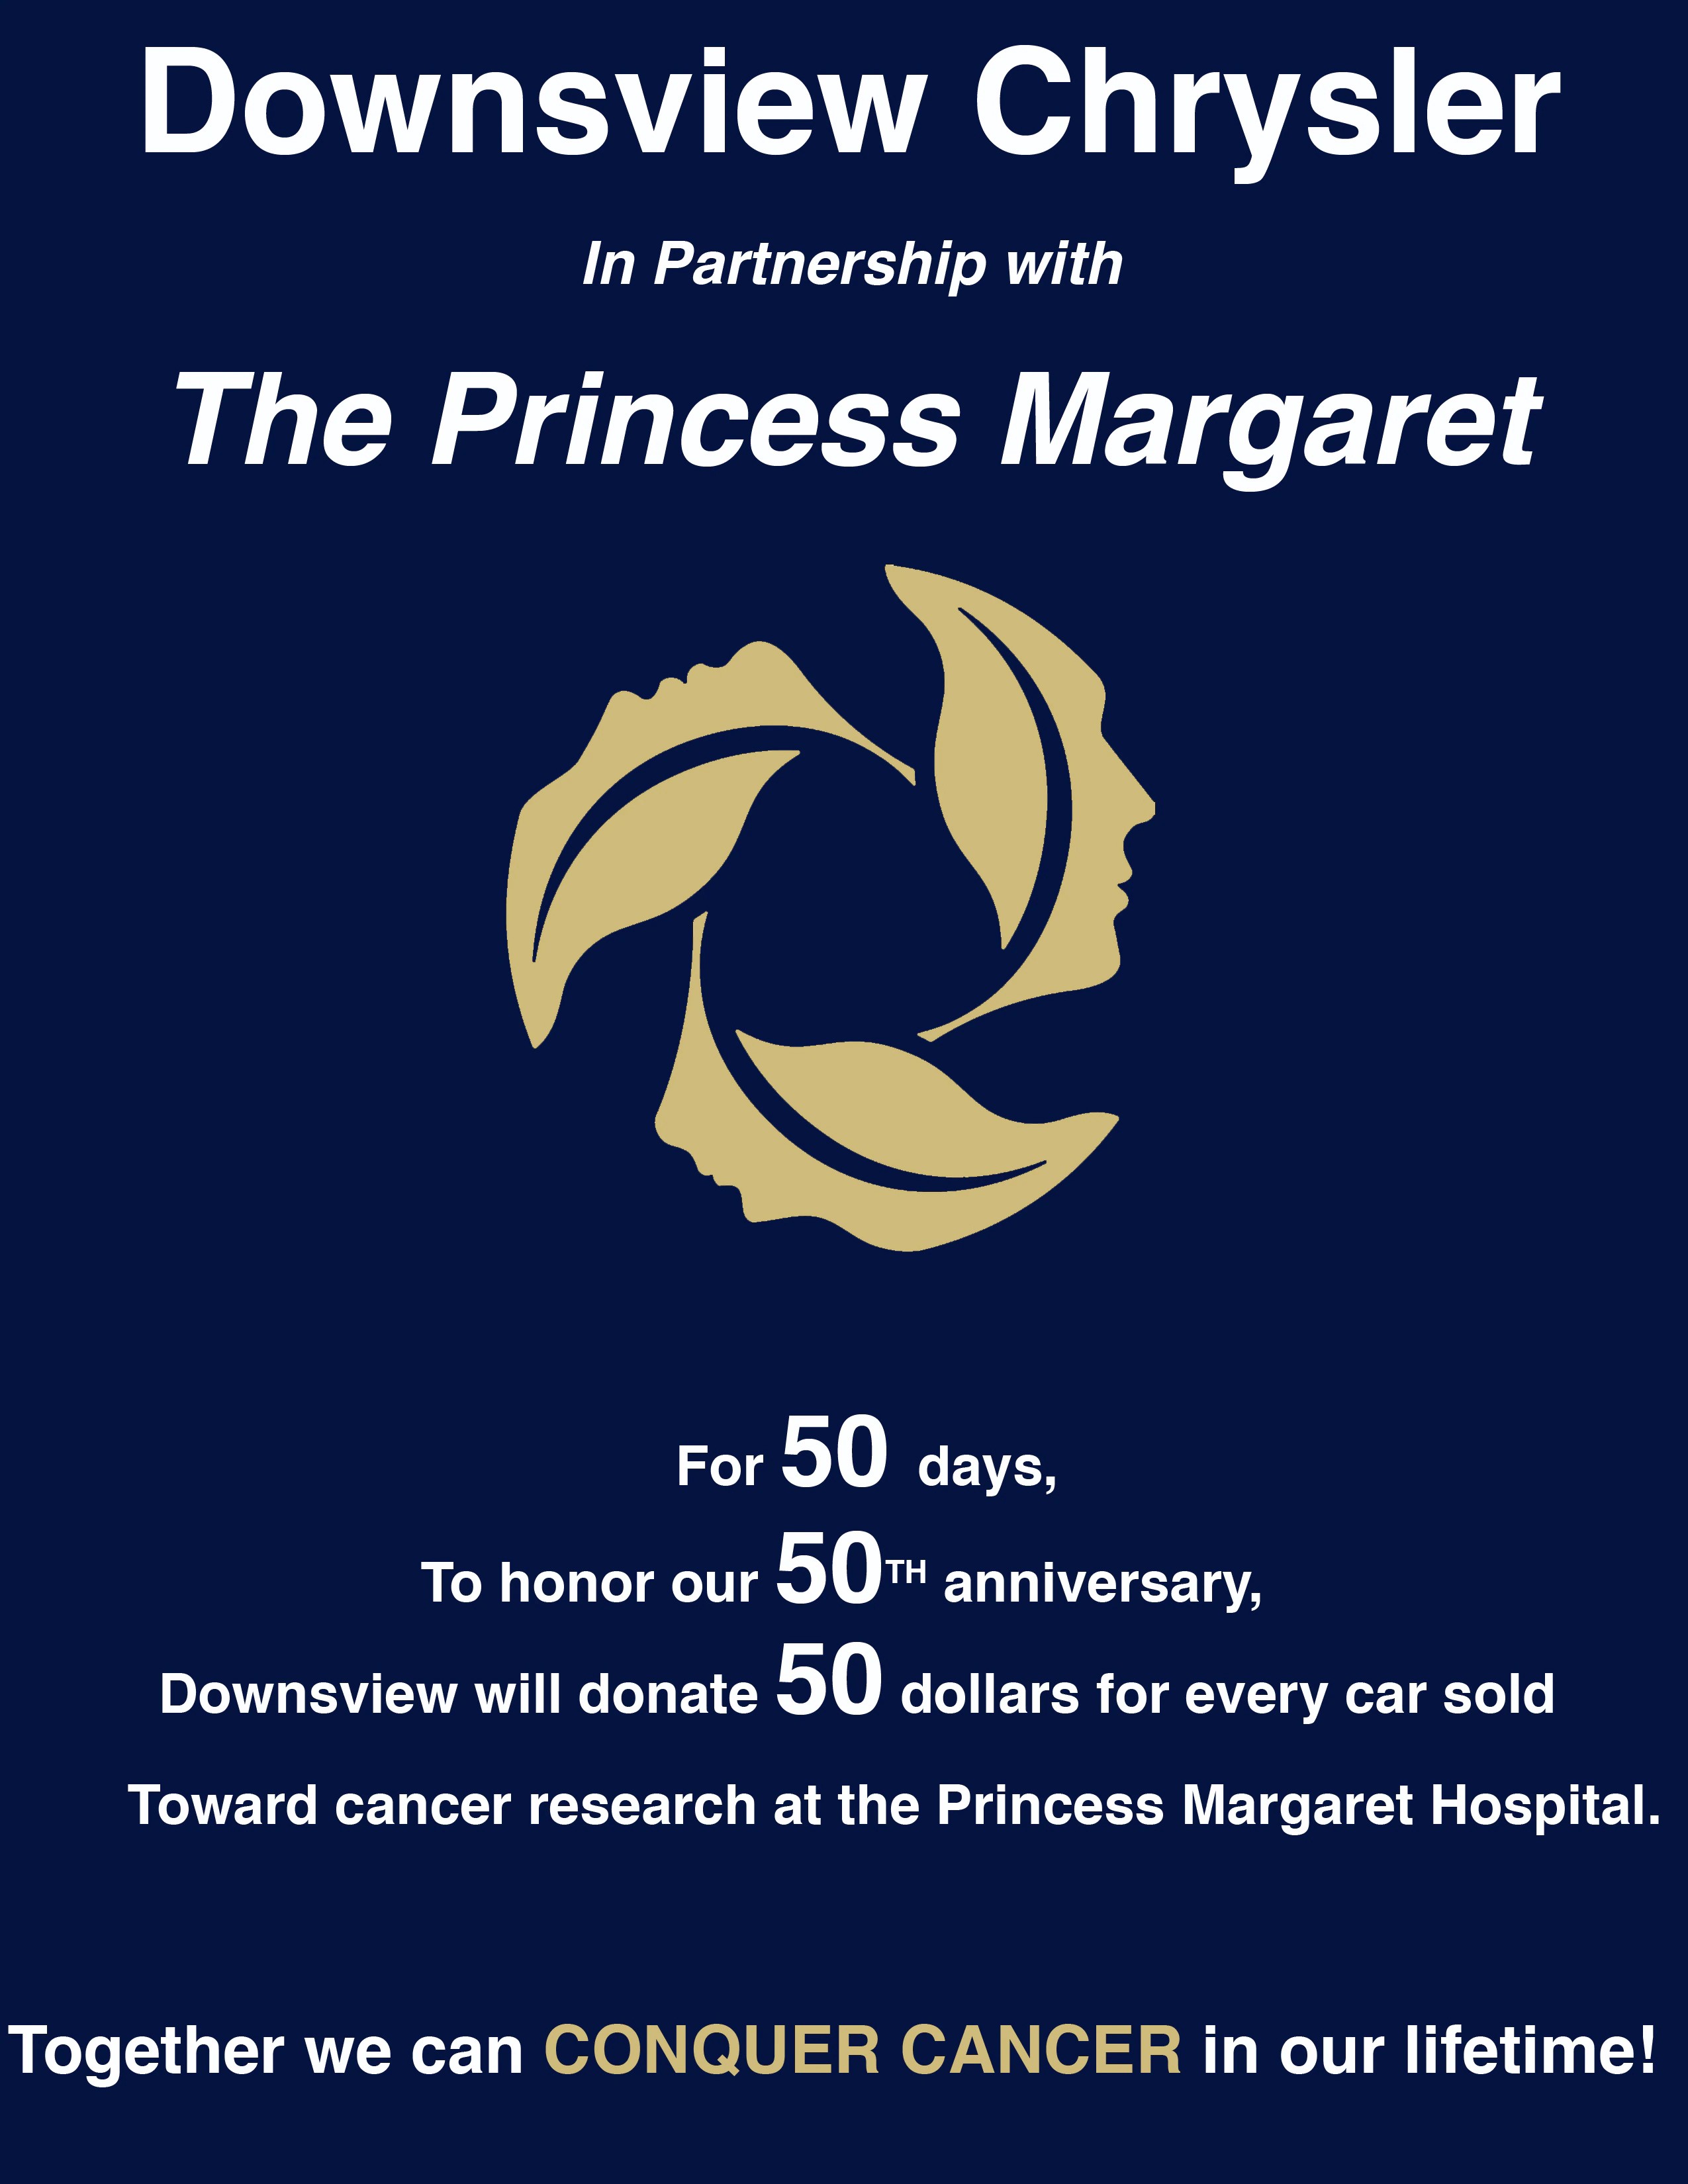 DOWNSVIEW'S PARTNERSHIP WITH PRINCESS MARGARET FOUNDATION